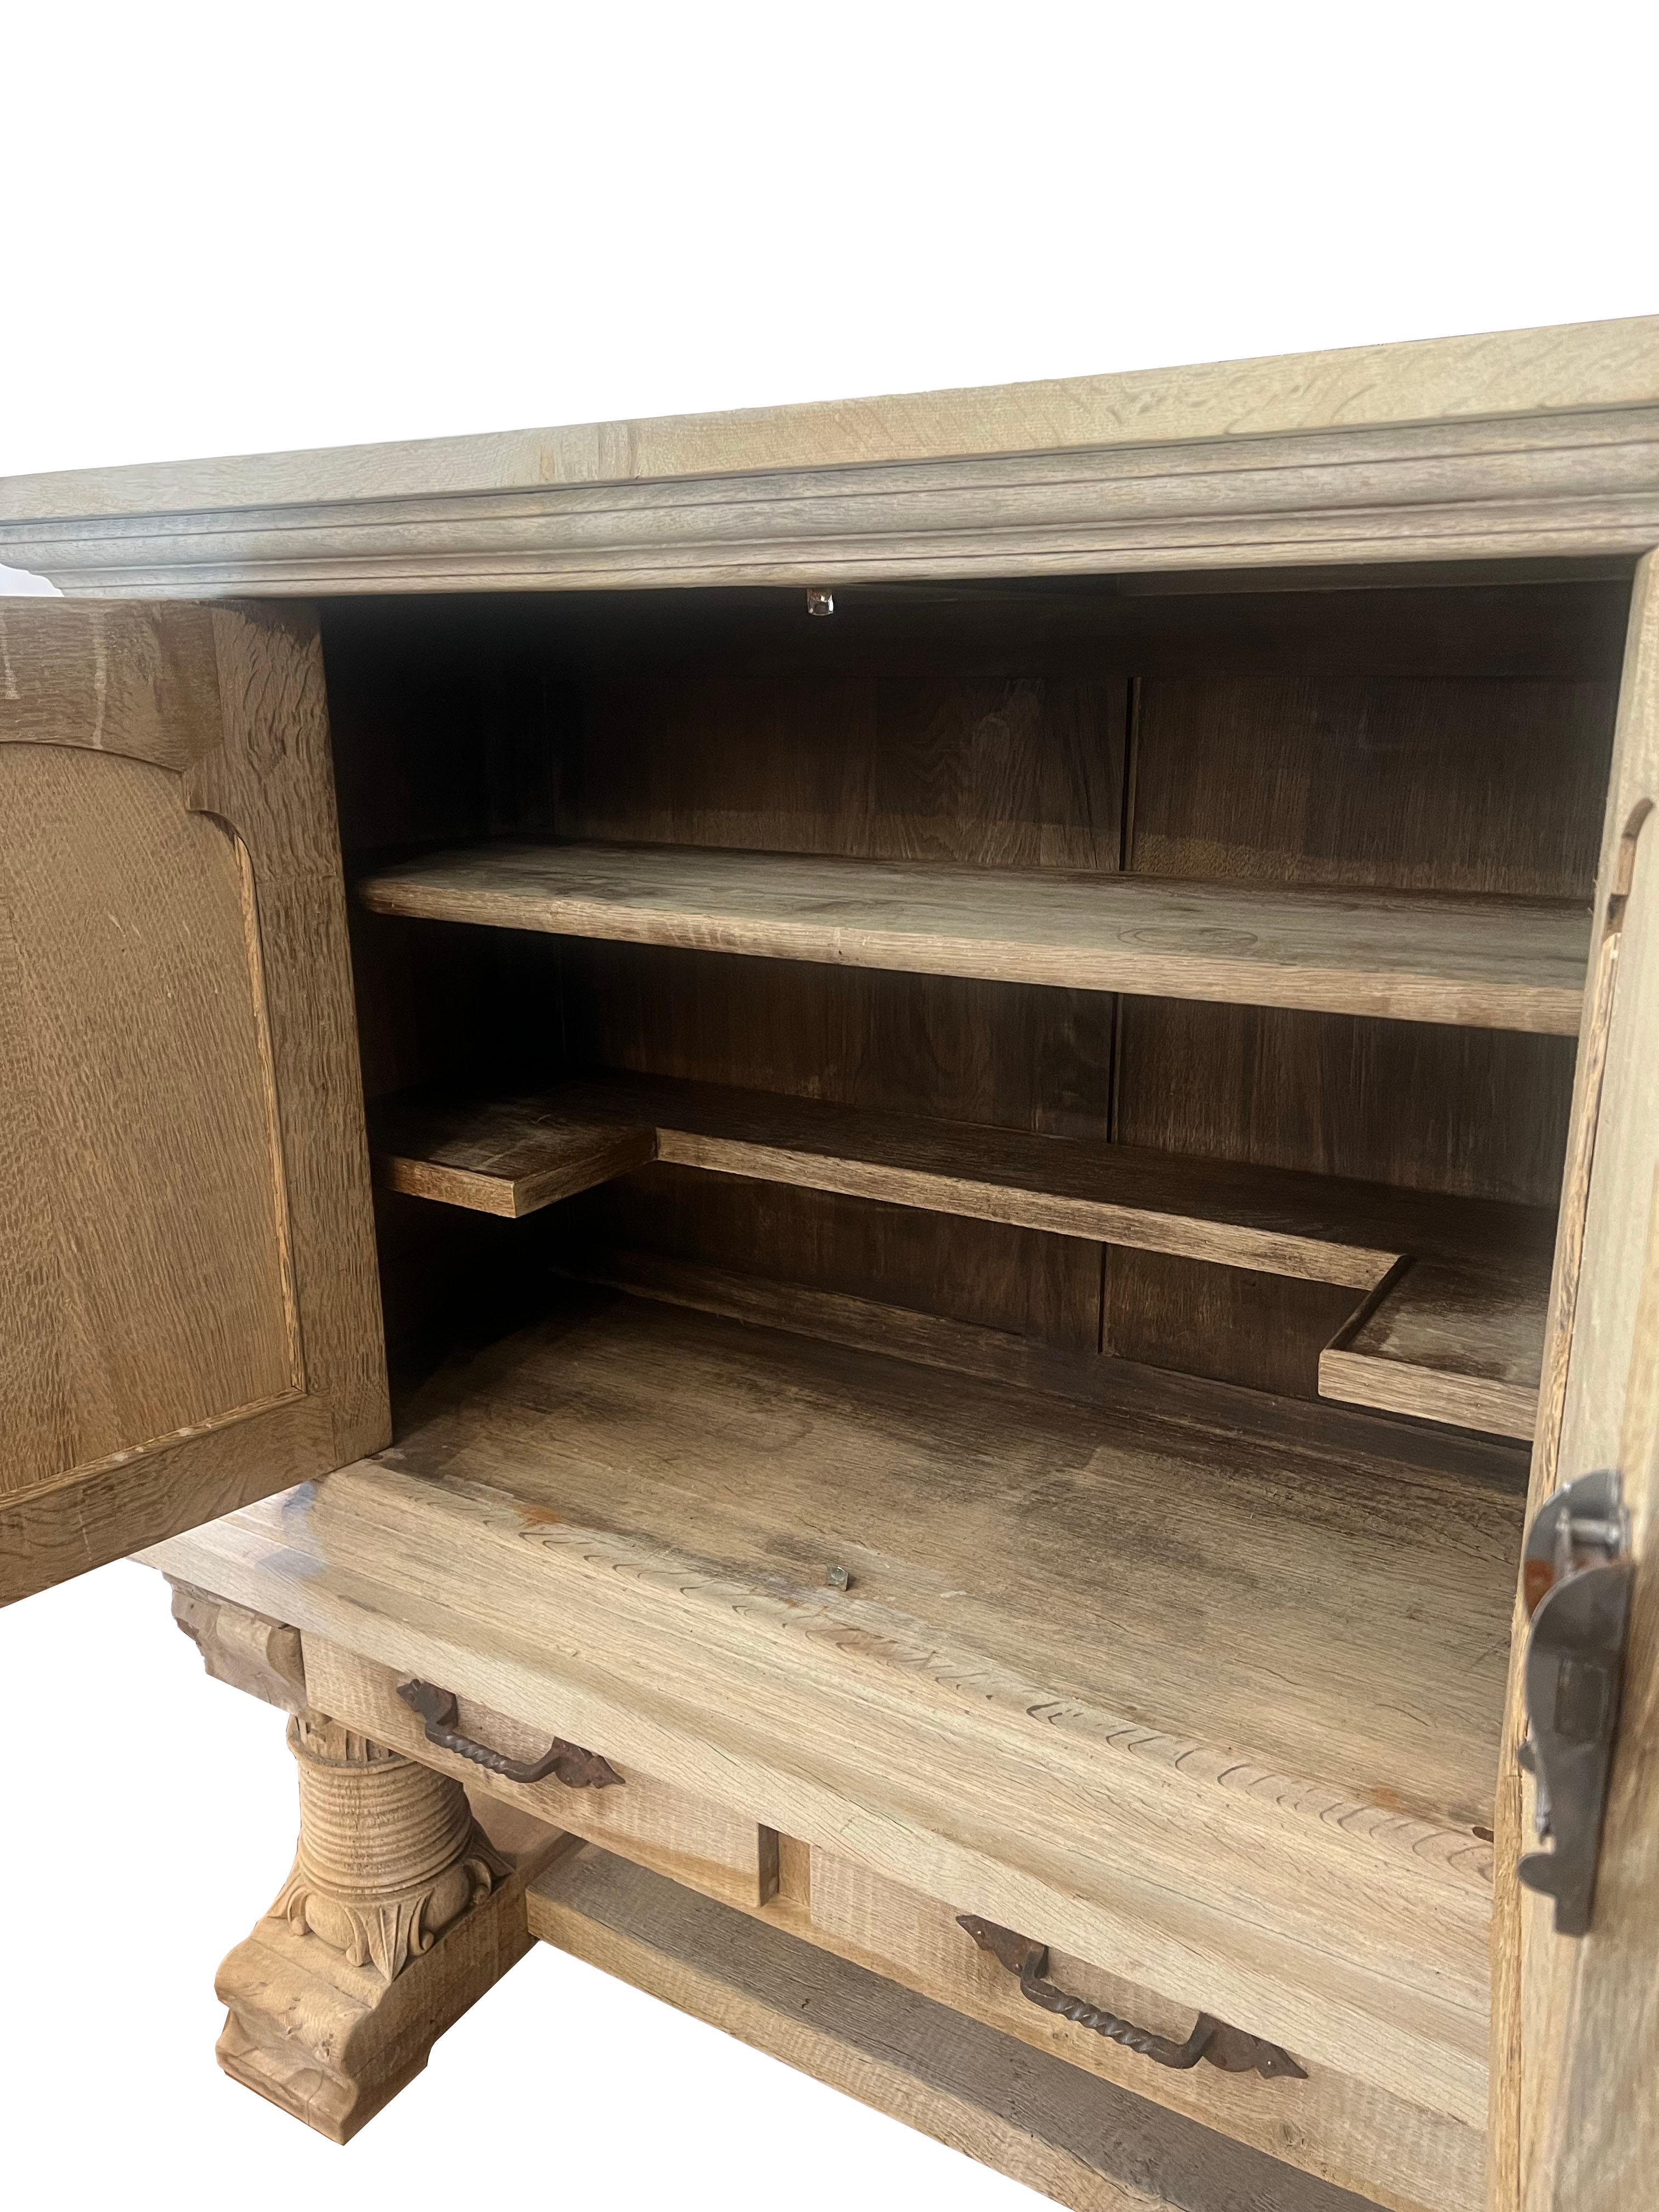 One-of-a-kind French Bleached Oak Cabinet In Good Condition For Sale In Scottsdale, AZ